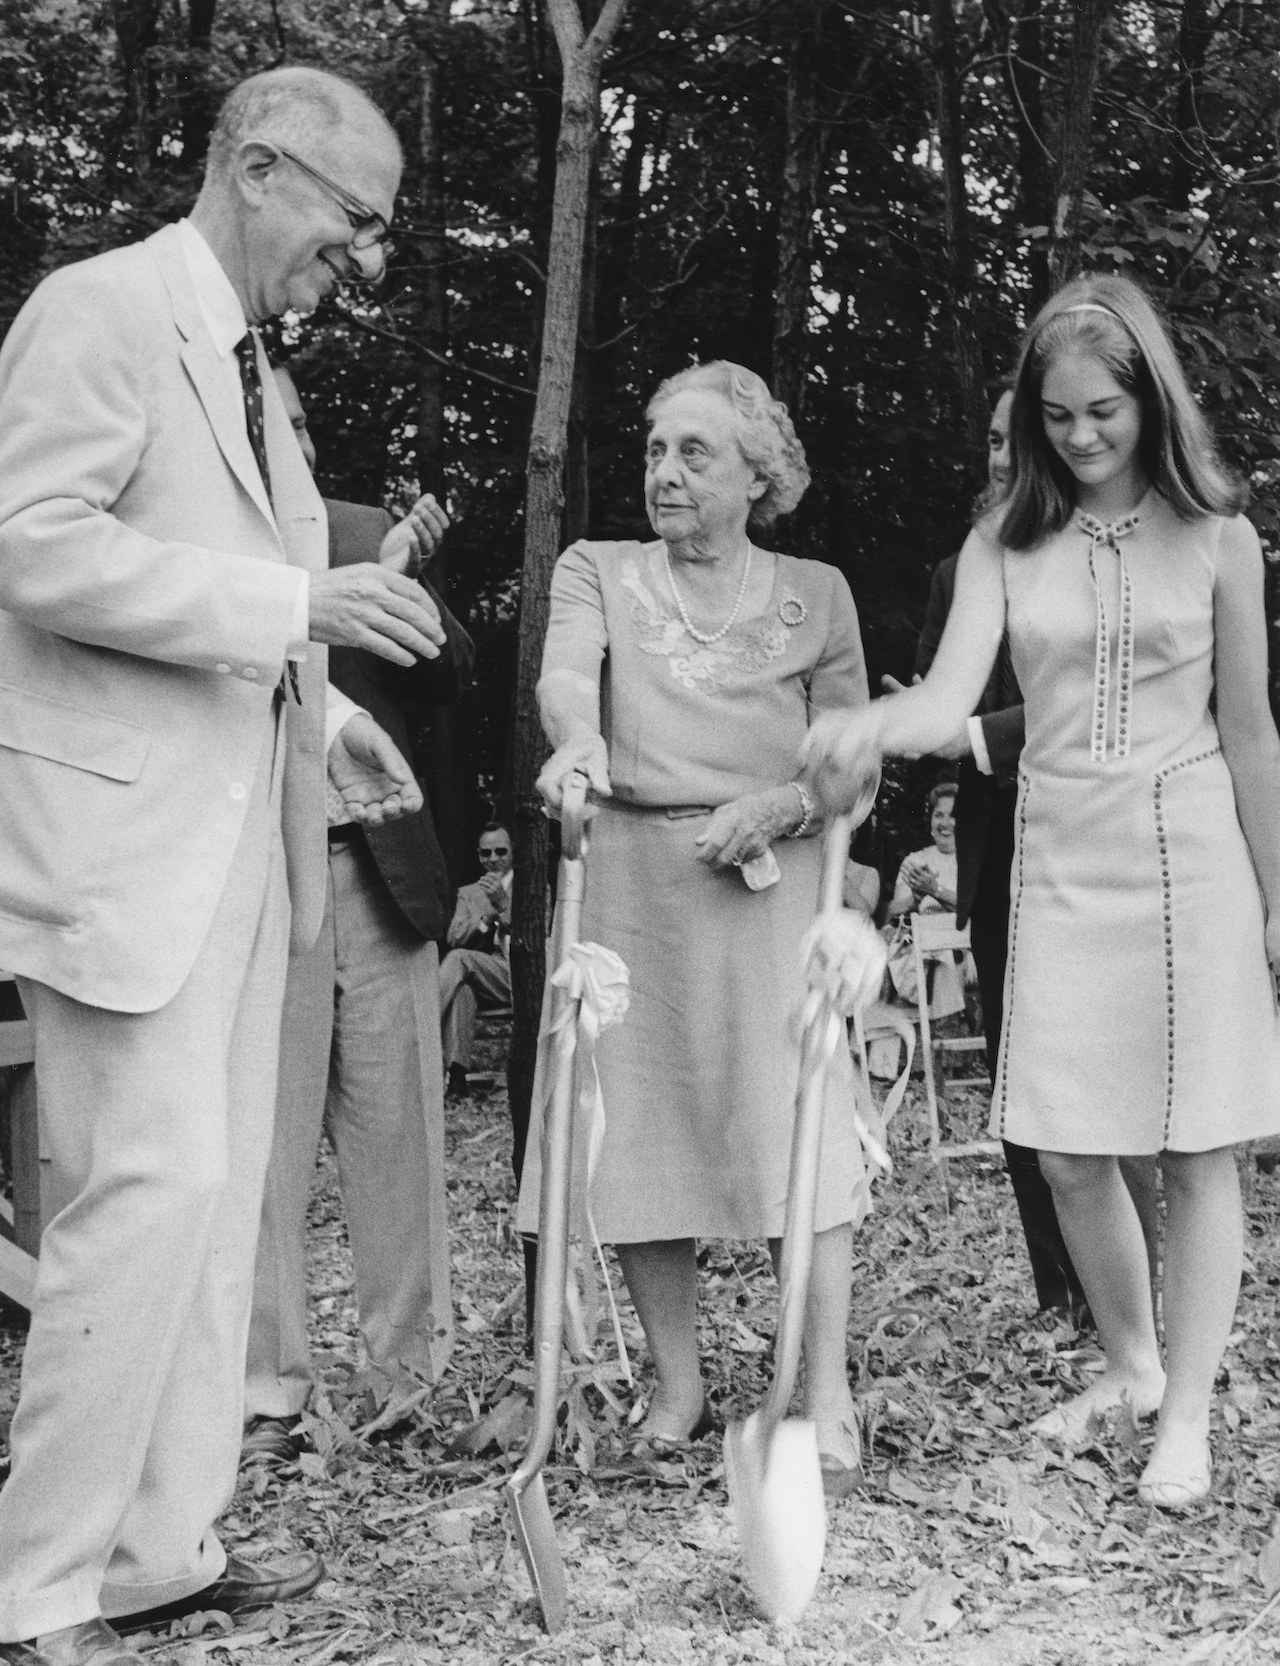 Former Musical Arts Association President Frank E. Joseph, Mrs. Dudley Blossom, Sr., and her granddaughter, Betsy Blossom, prepare to ceremoniously dig the first shovels of dirt